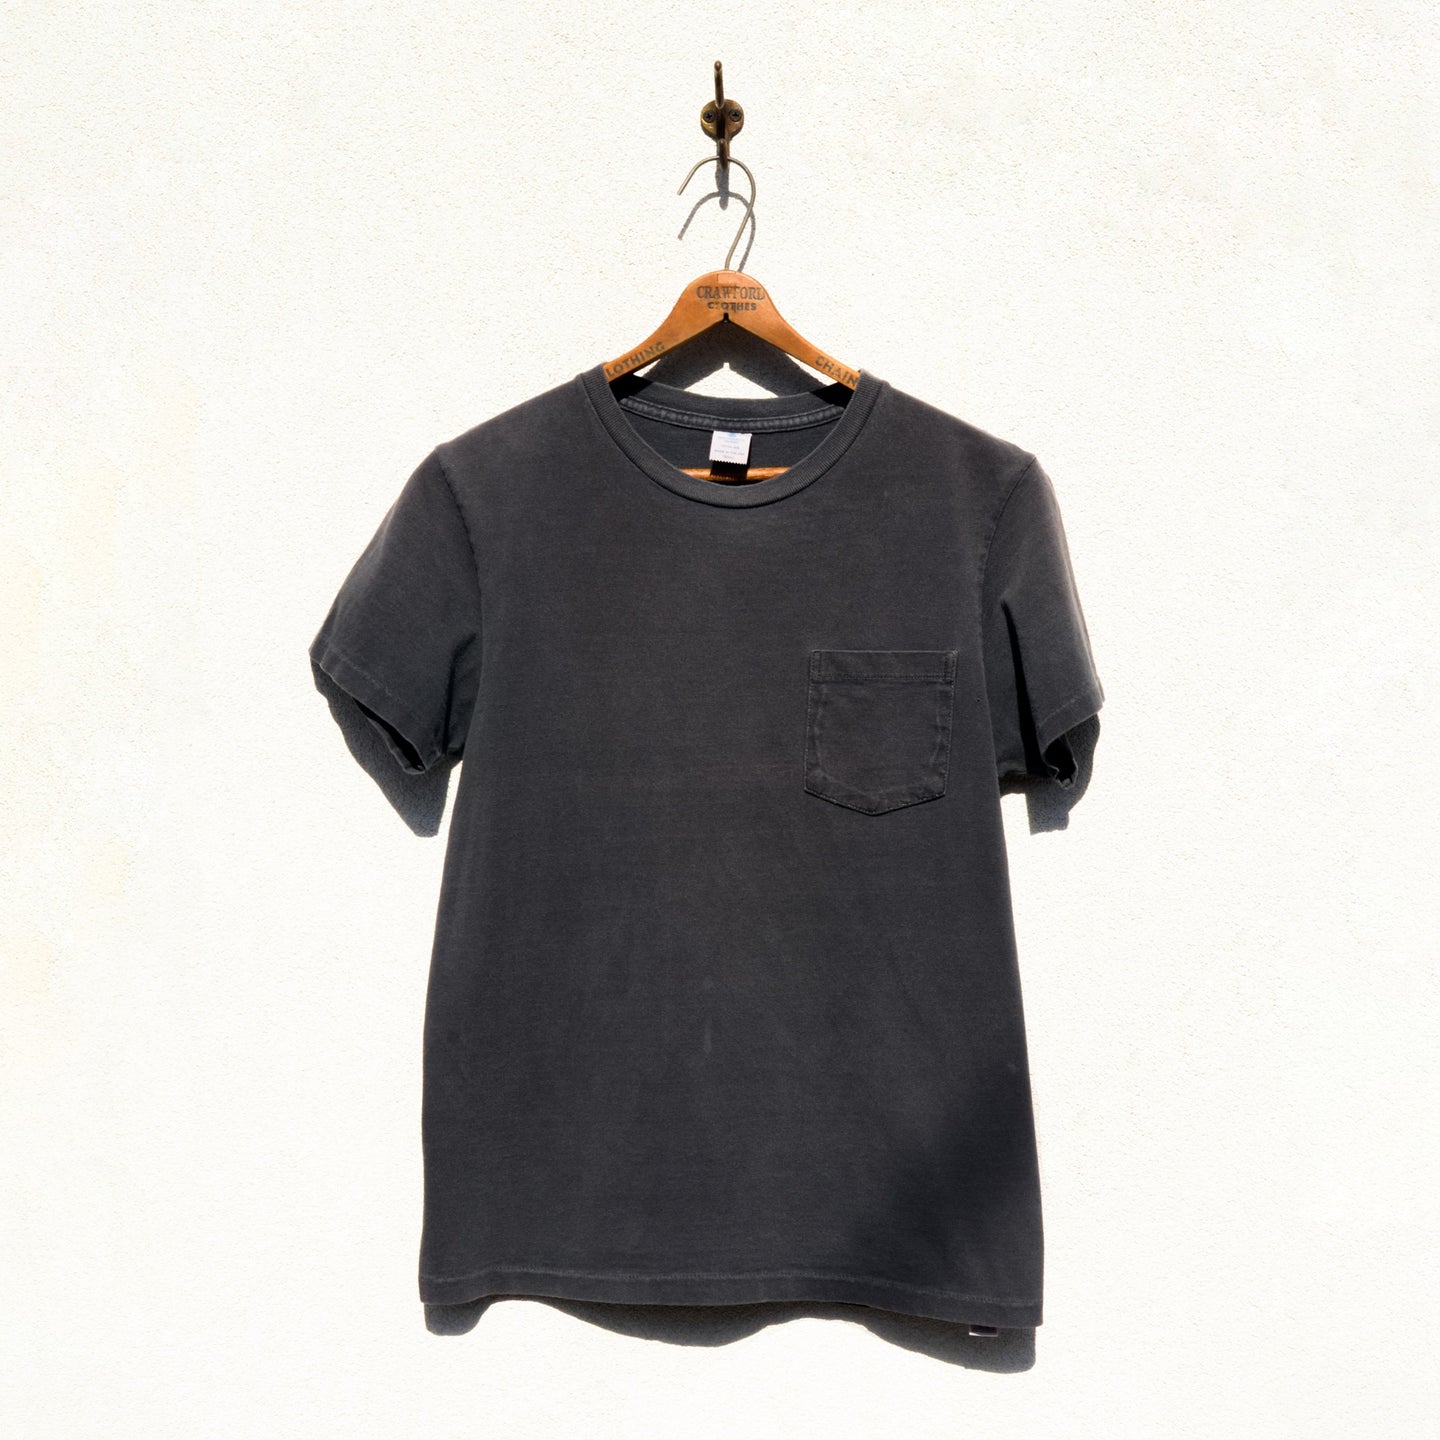 Unknown Brand - All Cotton Pocket T shirt